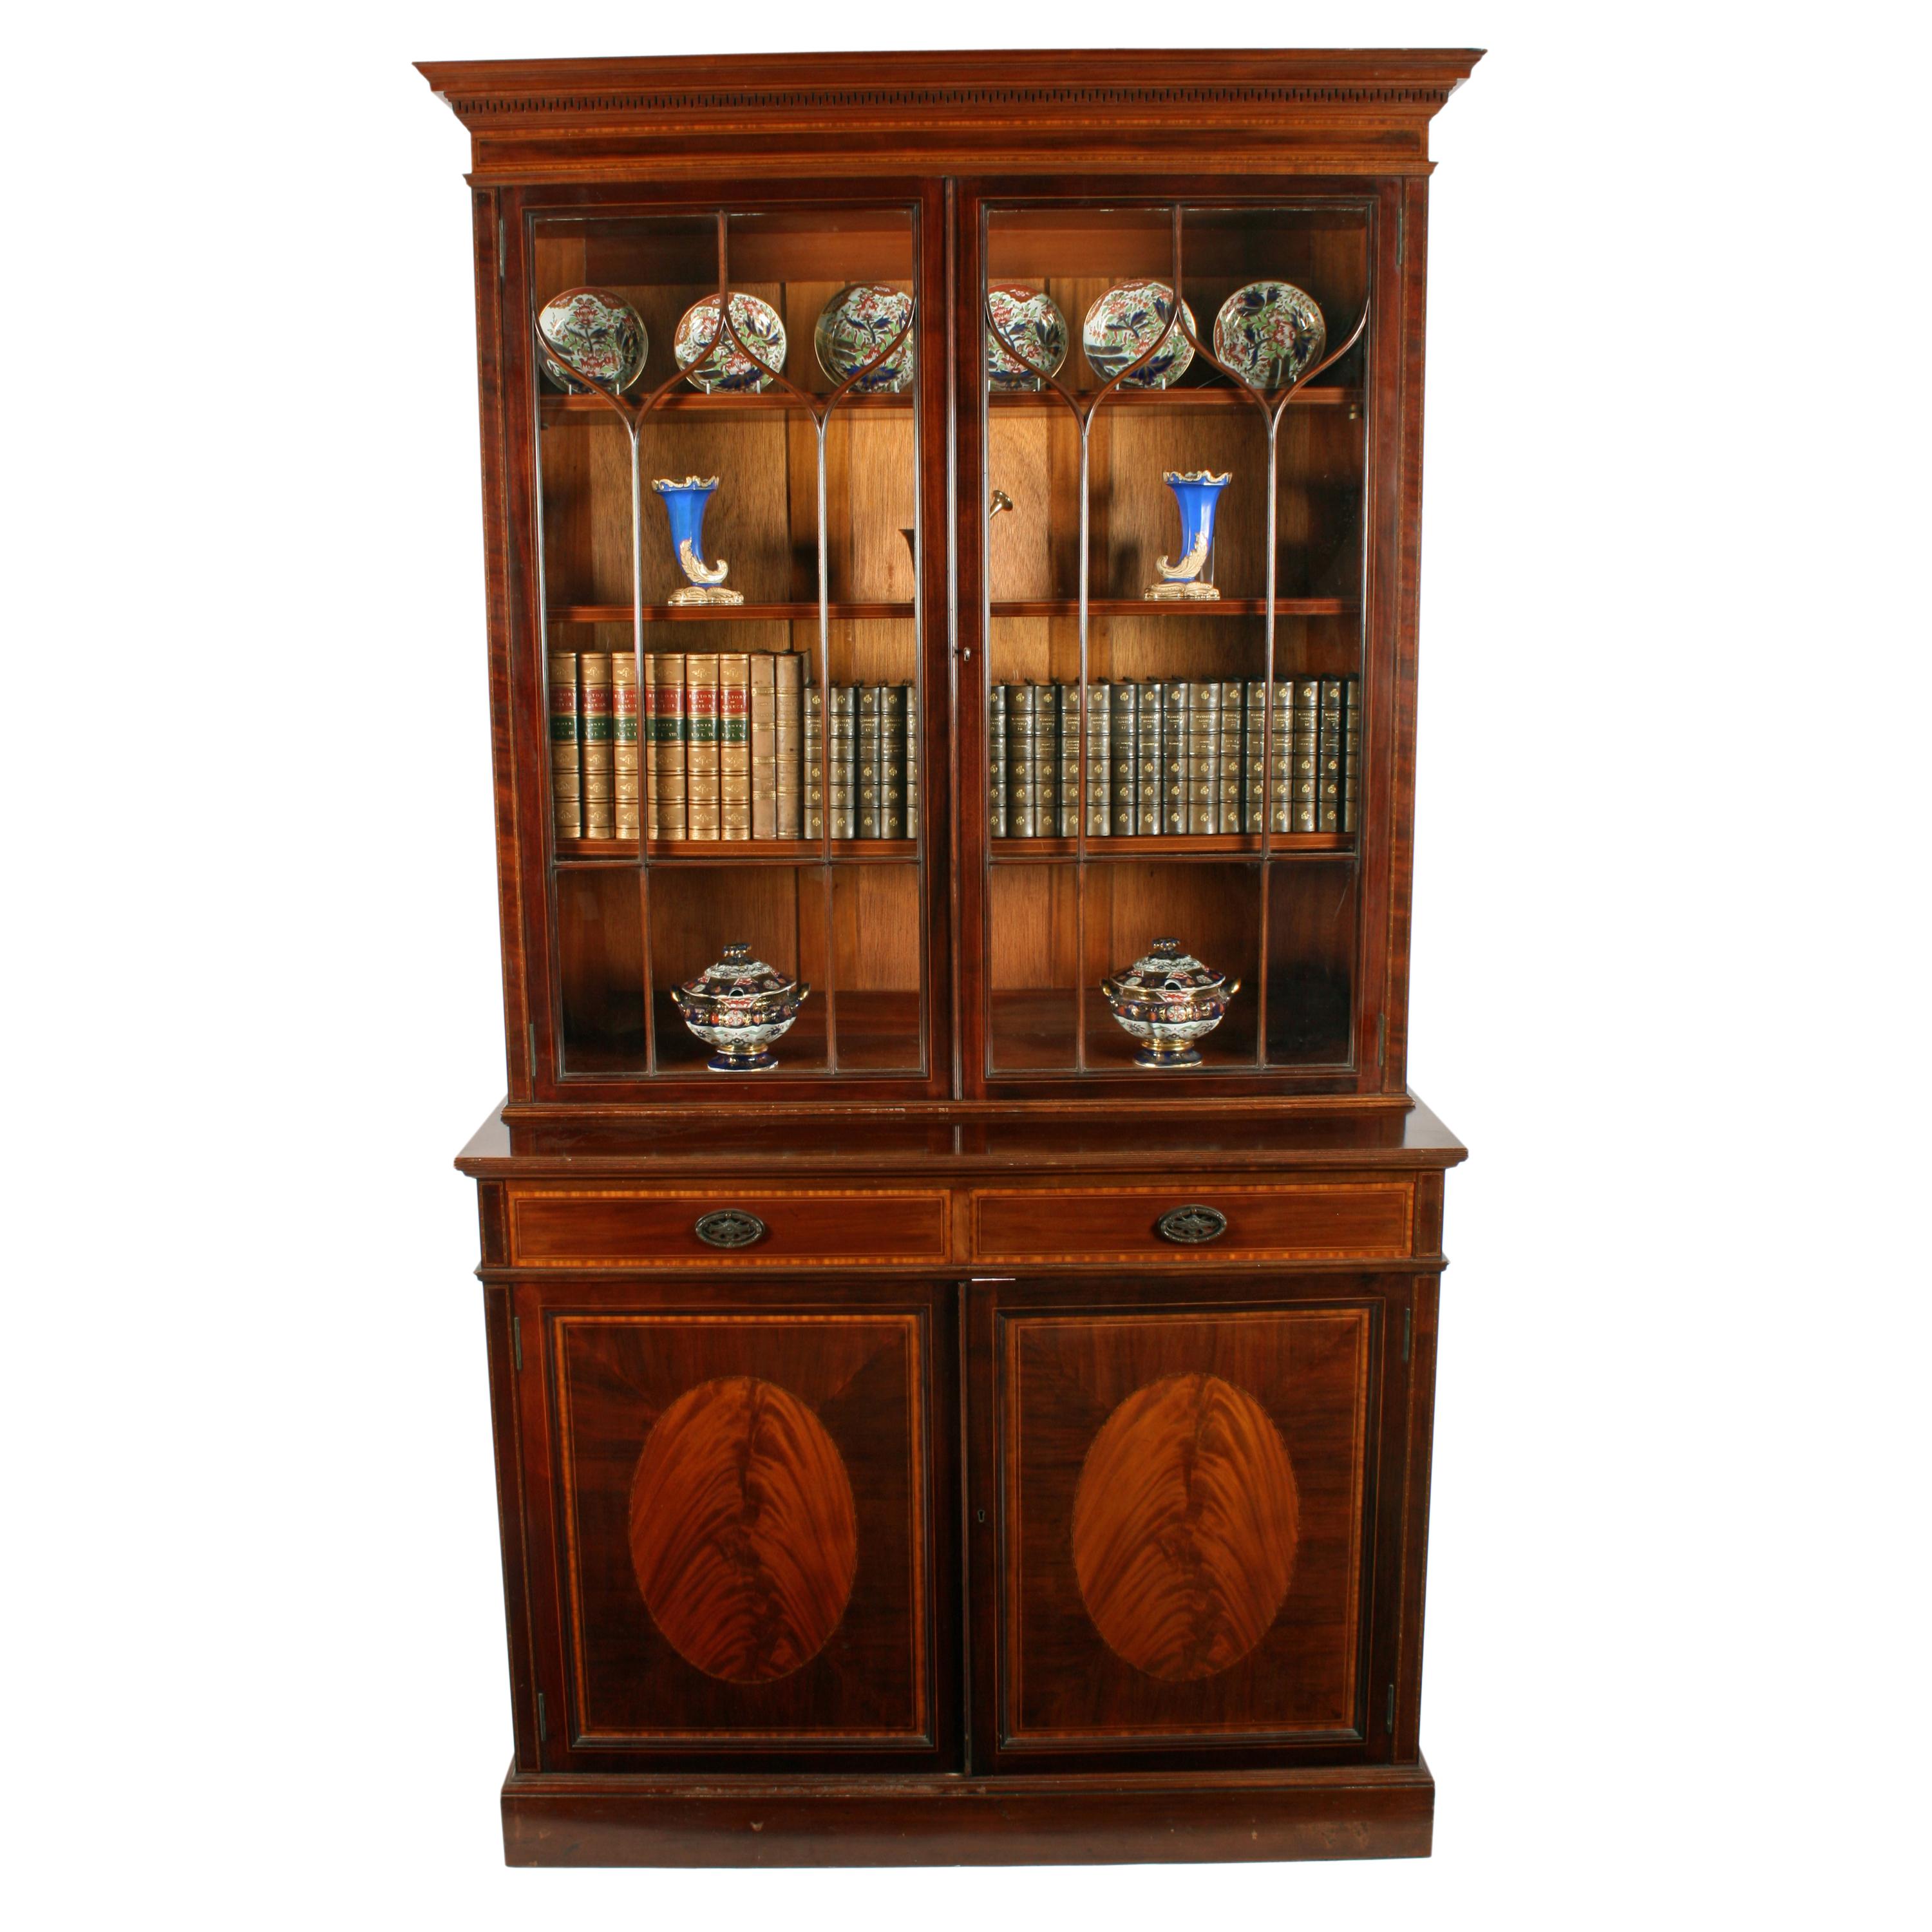 An early 20th century mahogany Sheraton style bookcase by Waring & Gillows.

The bookcase has an astragal glazed two-door cabinet top with three adjustable mahogany shelves.

The base has a pair of recessed panel doors with oval panels of flamed